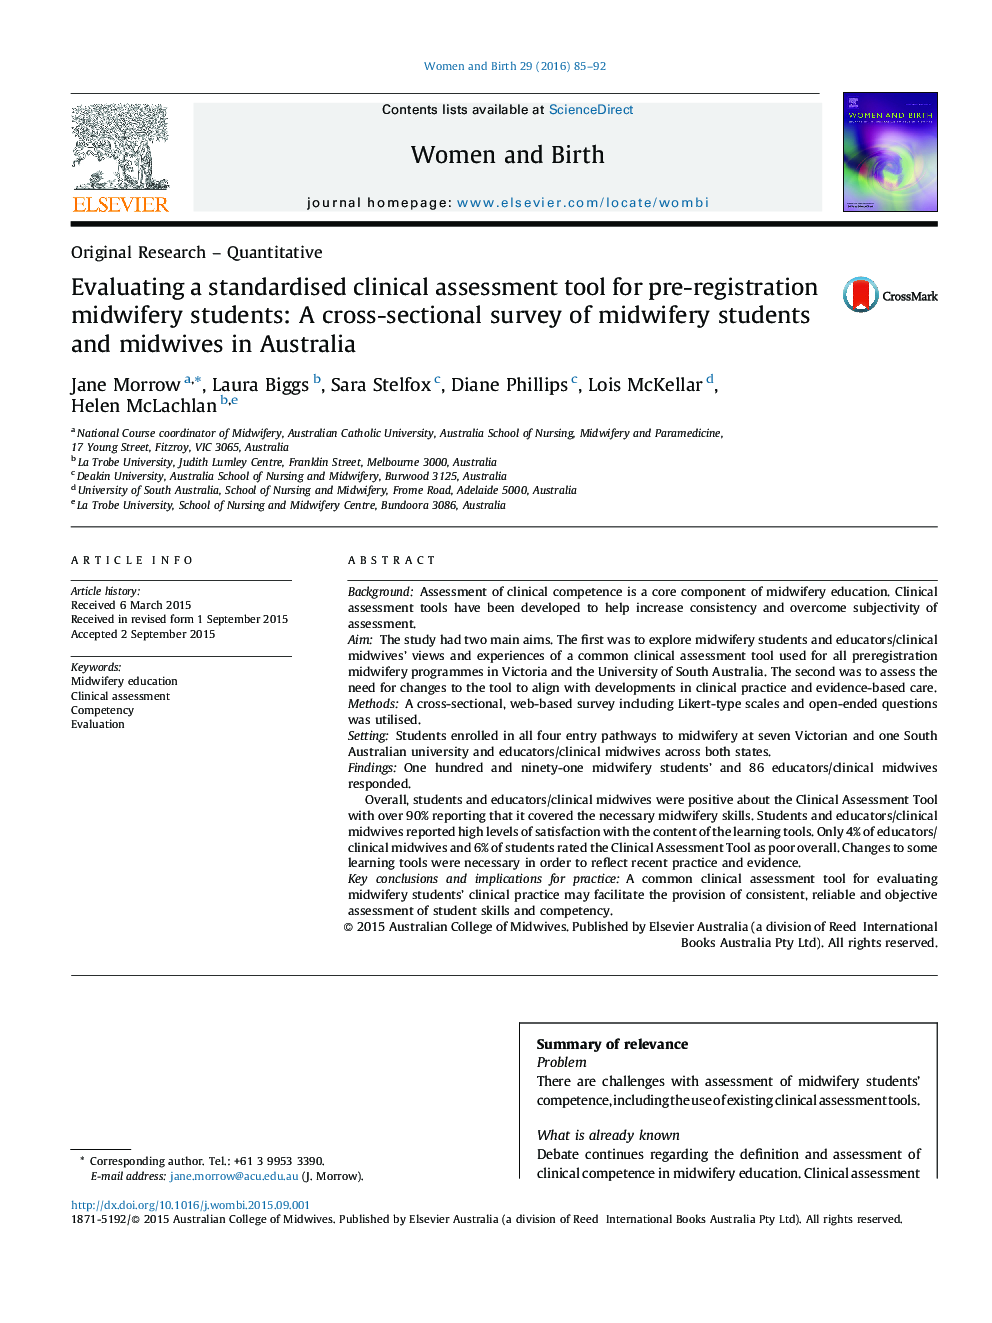 Evaluating a standardised clinical assessment tool for pre-registration midwifery students: A cross-sectional survey of midwifery students and midwives in Australia